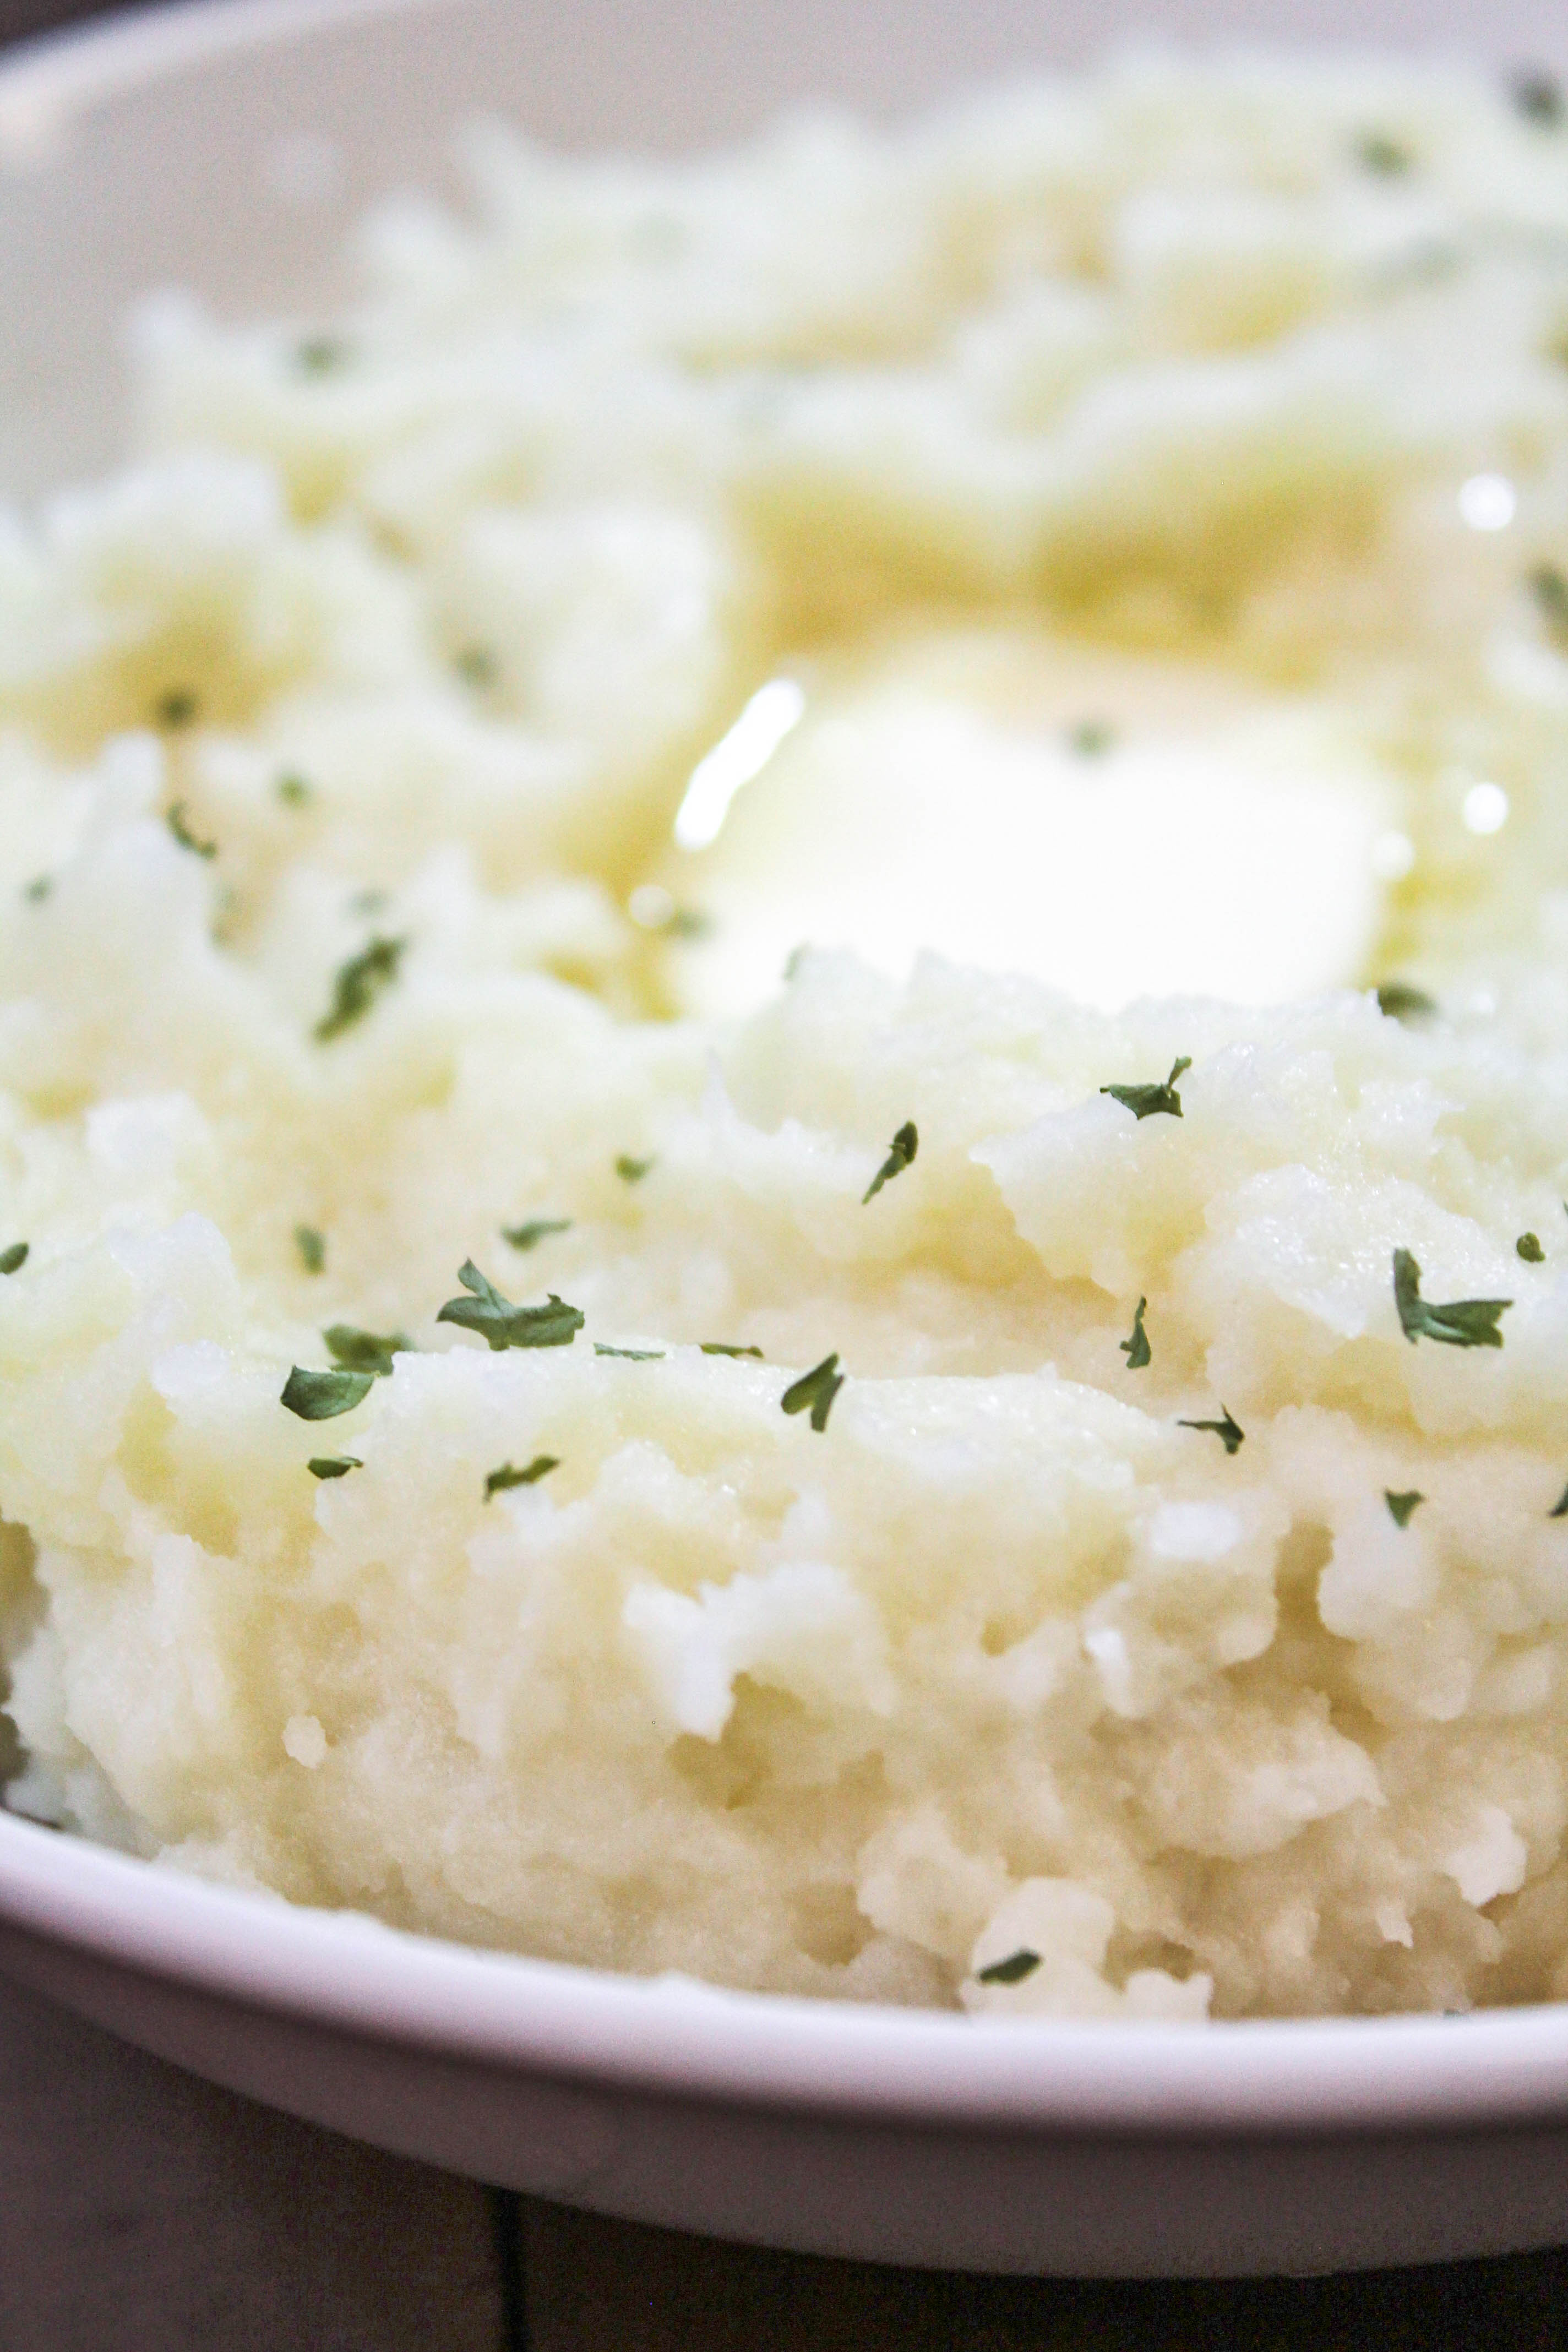 A close up image of creamy mashed potatoes, garnished with parsley flakes and a melted pat of butter.